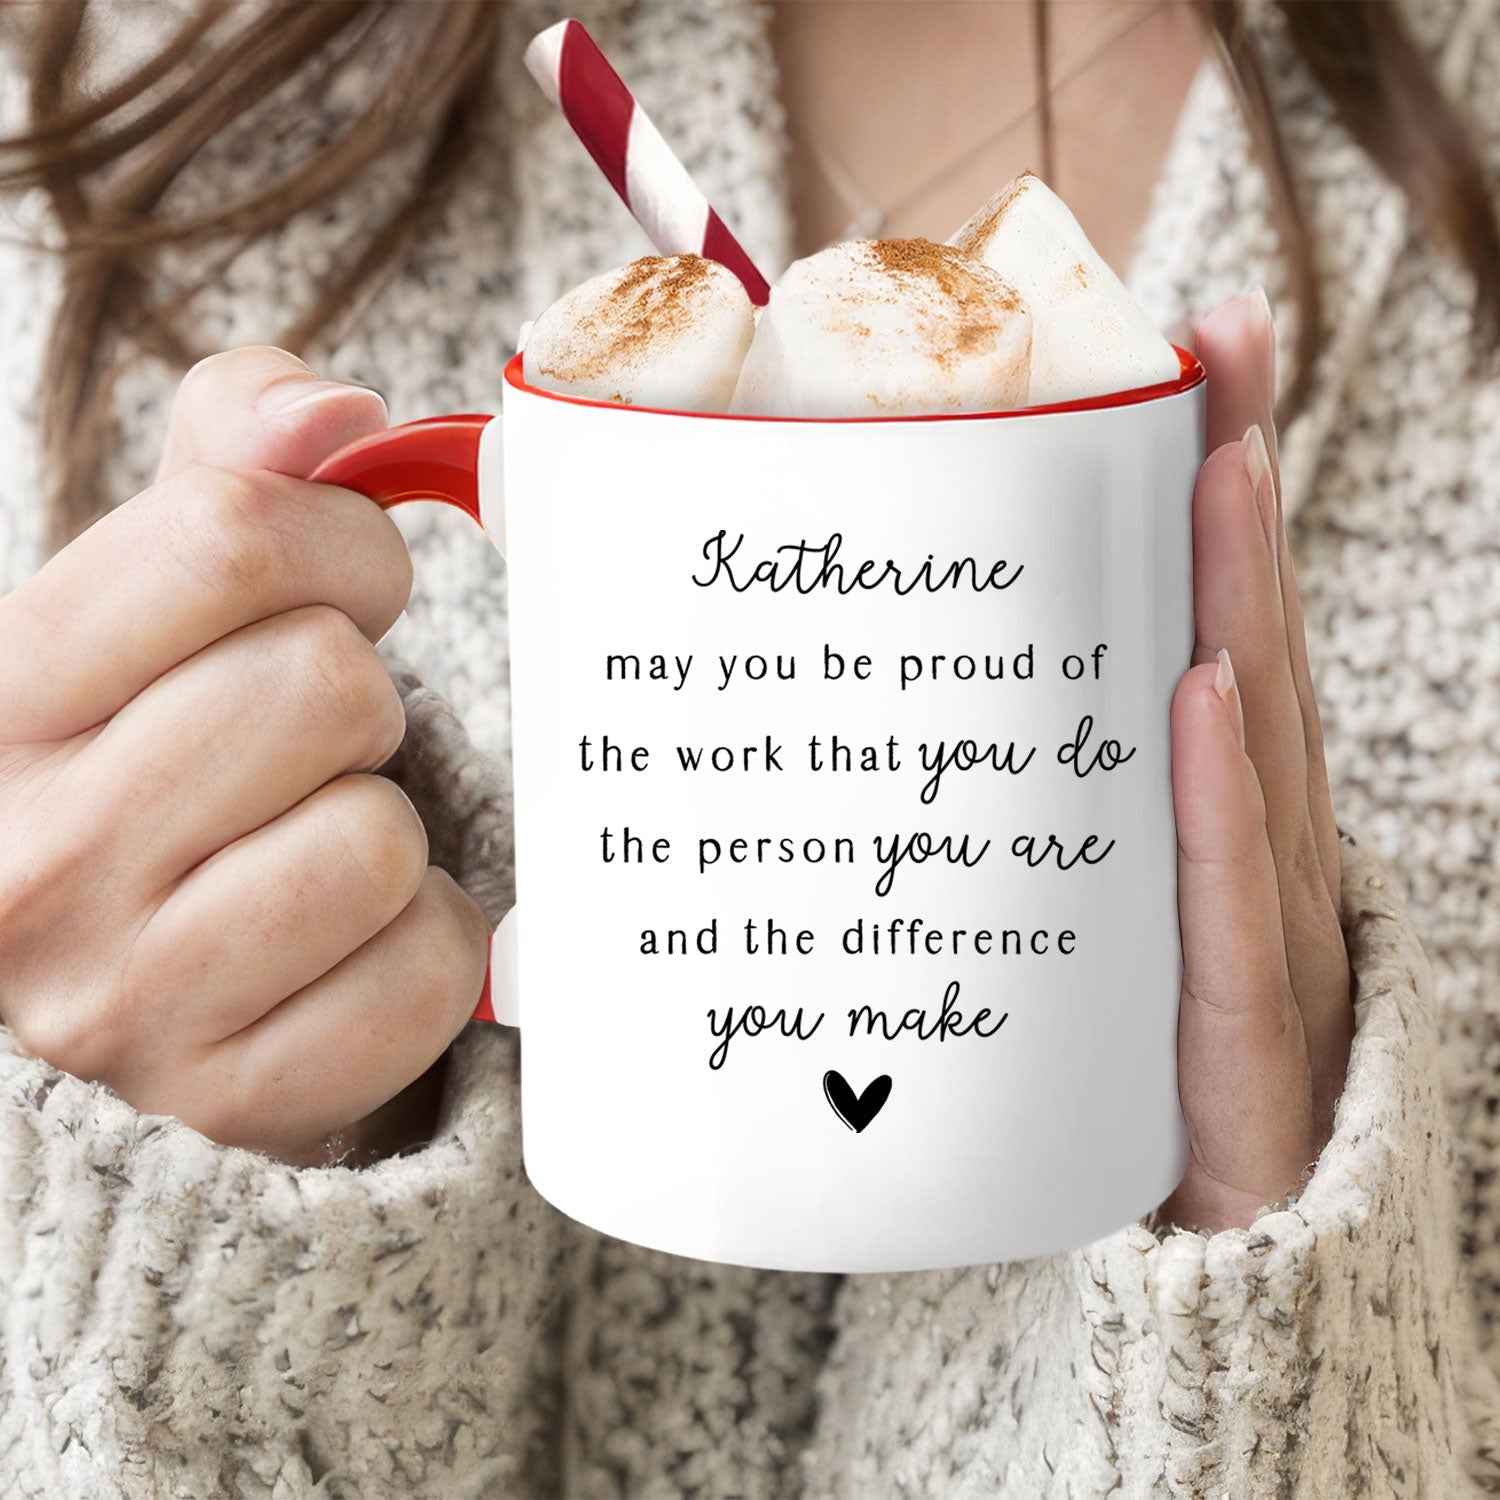 May You Be Proud Of The Difference You Make - Personalized Birthday or Christmas gift For Coworker or Employee - Custom Accent Mug - MyMindfulGifts